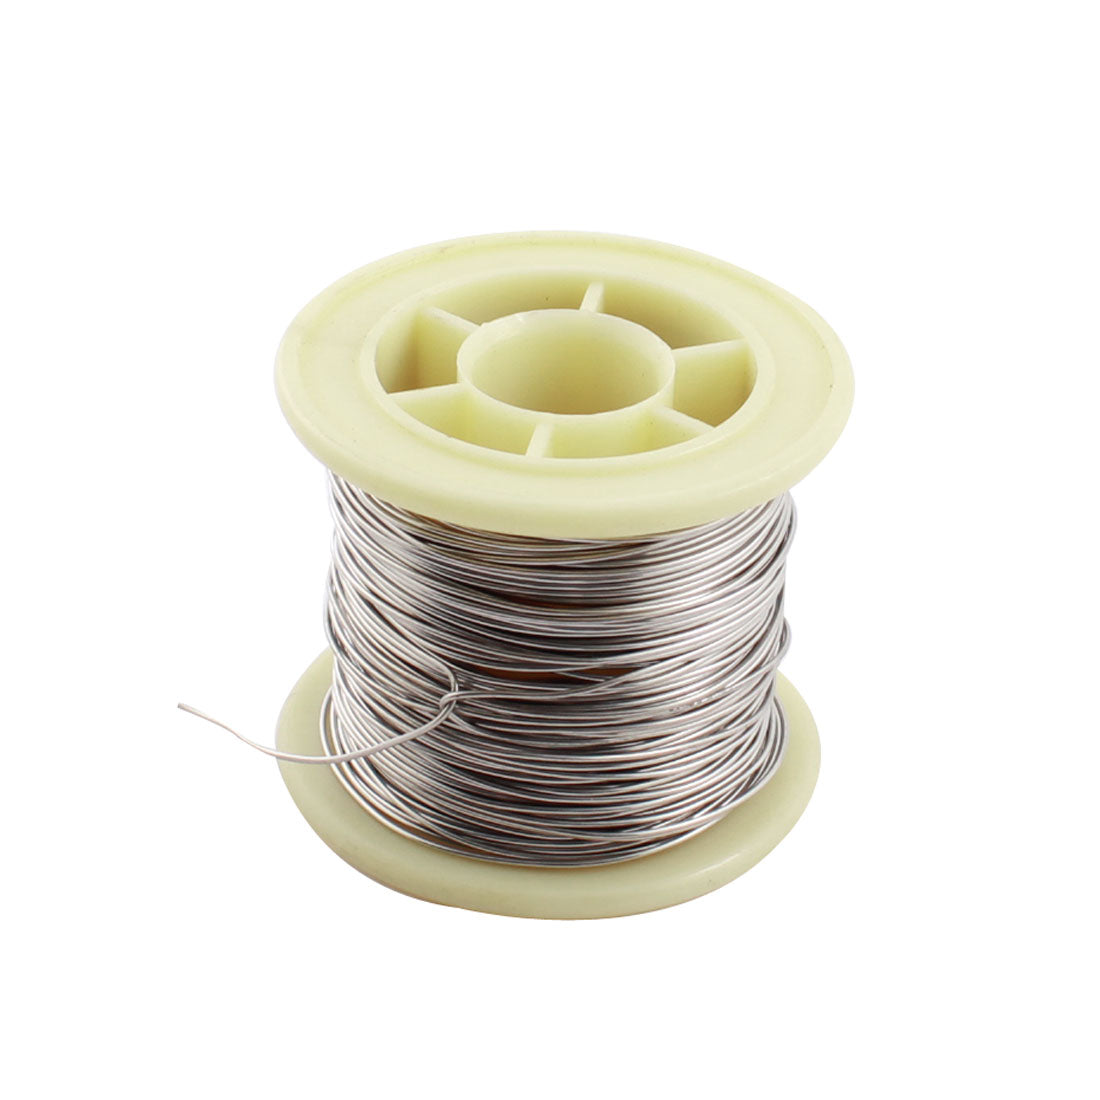 uxcell Uxcell 0.7mm Diameter AWG21 15meter 50ft Length Resistance Heating Coils Heater Resistor Wire